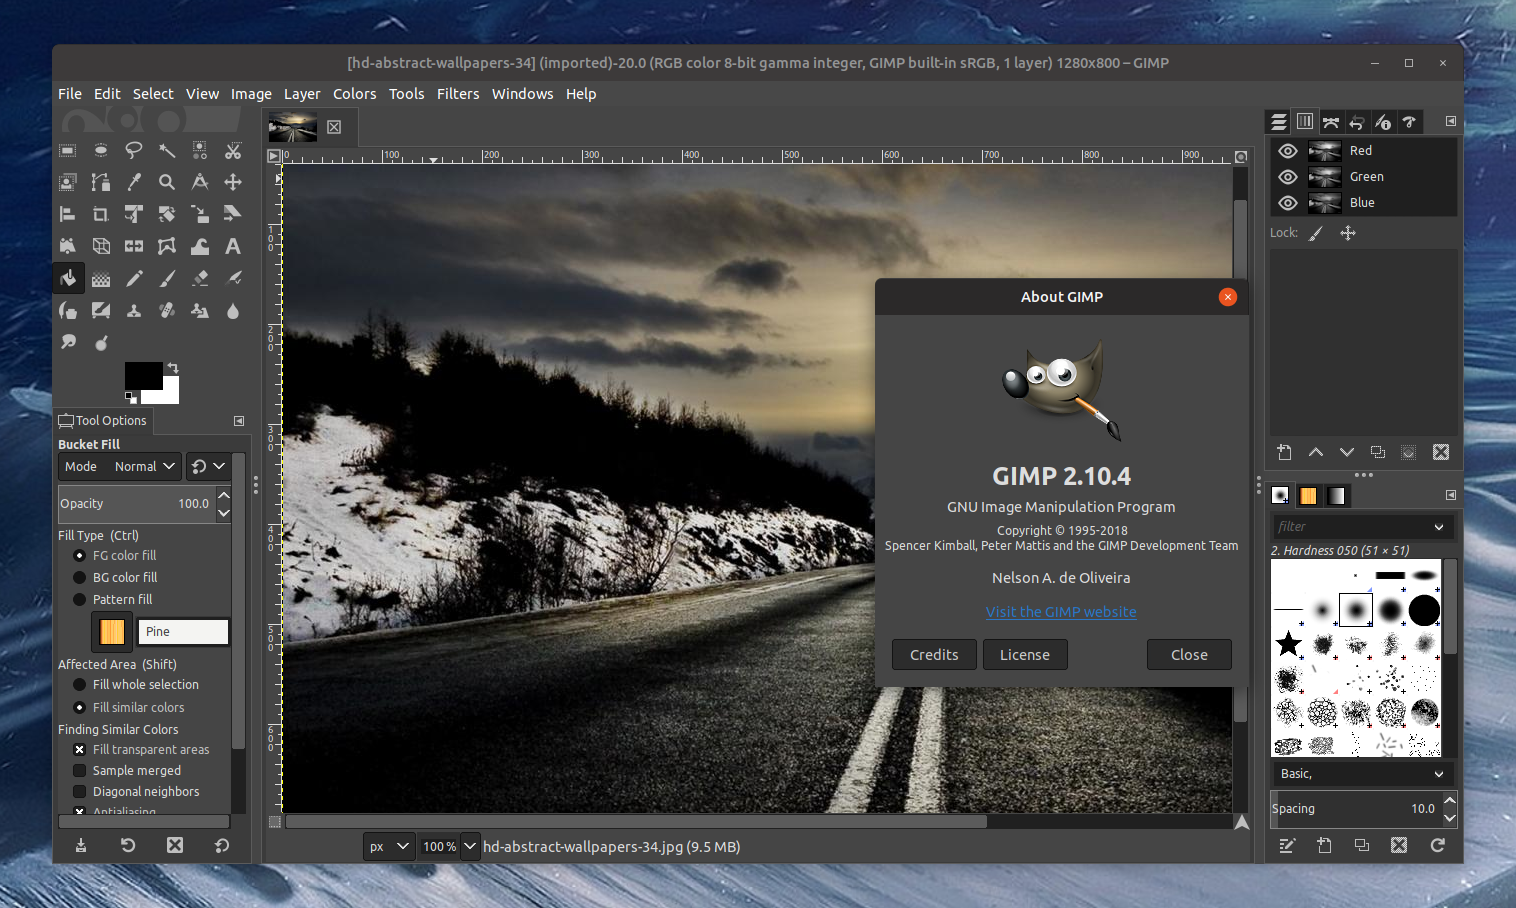 How to Download and Install GIMP for PC